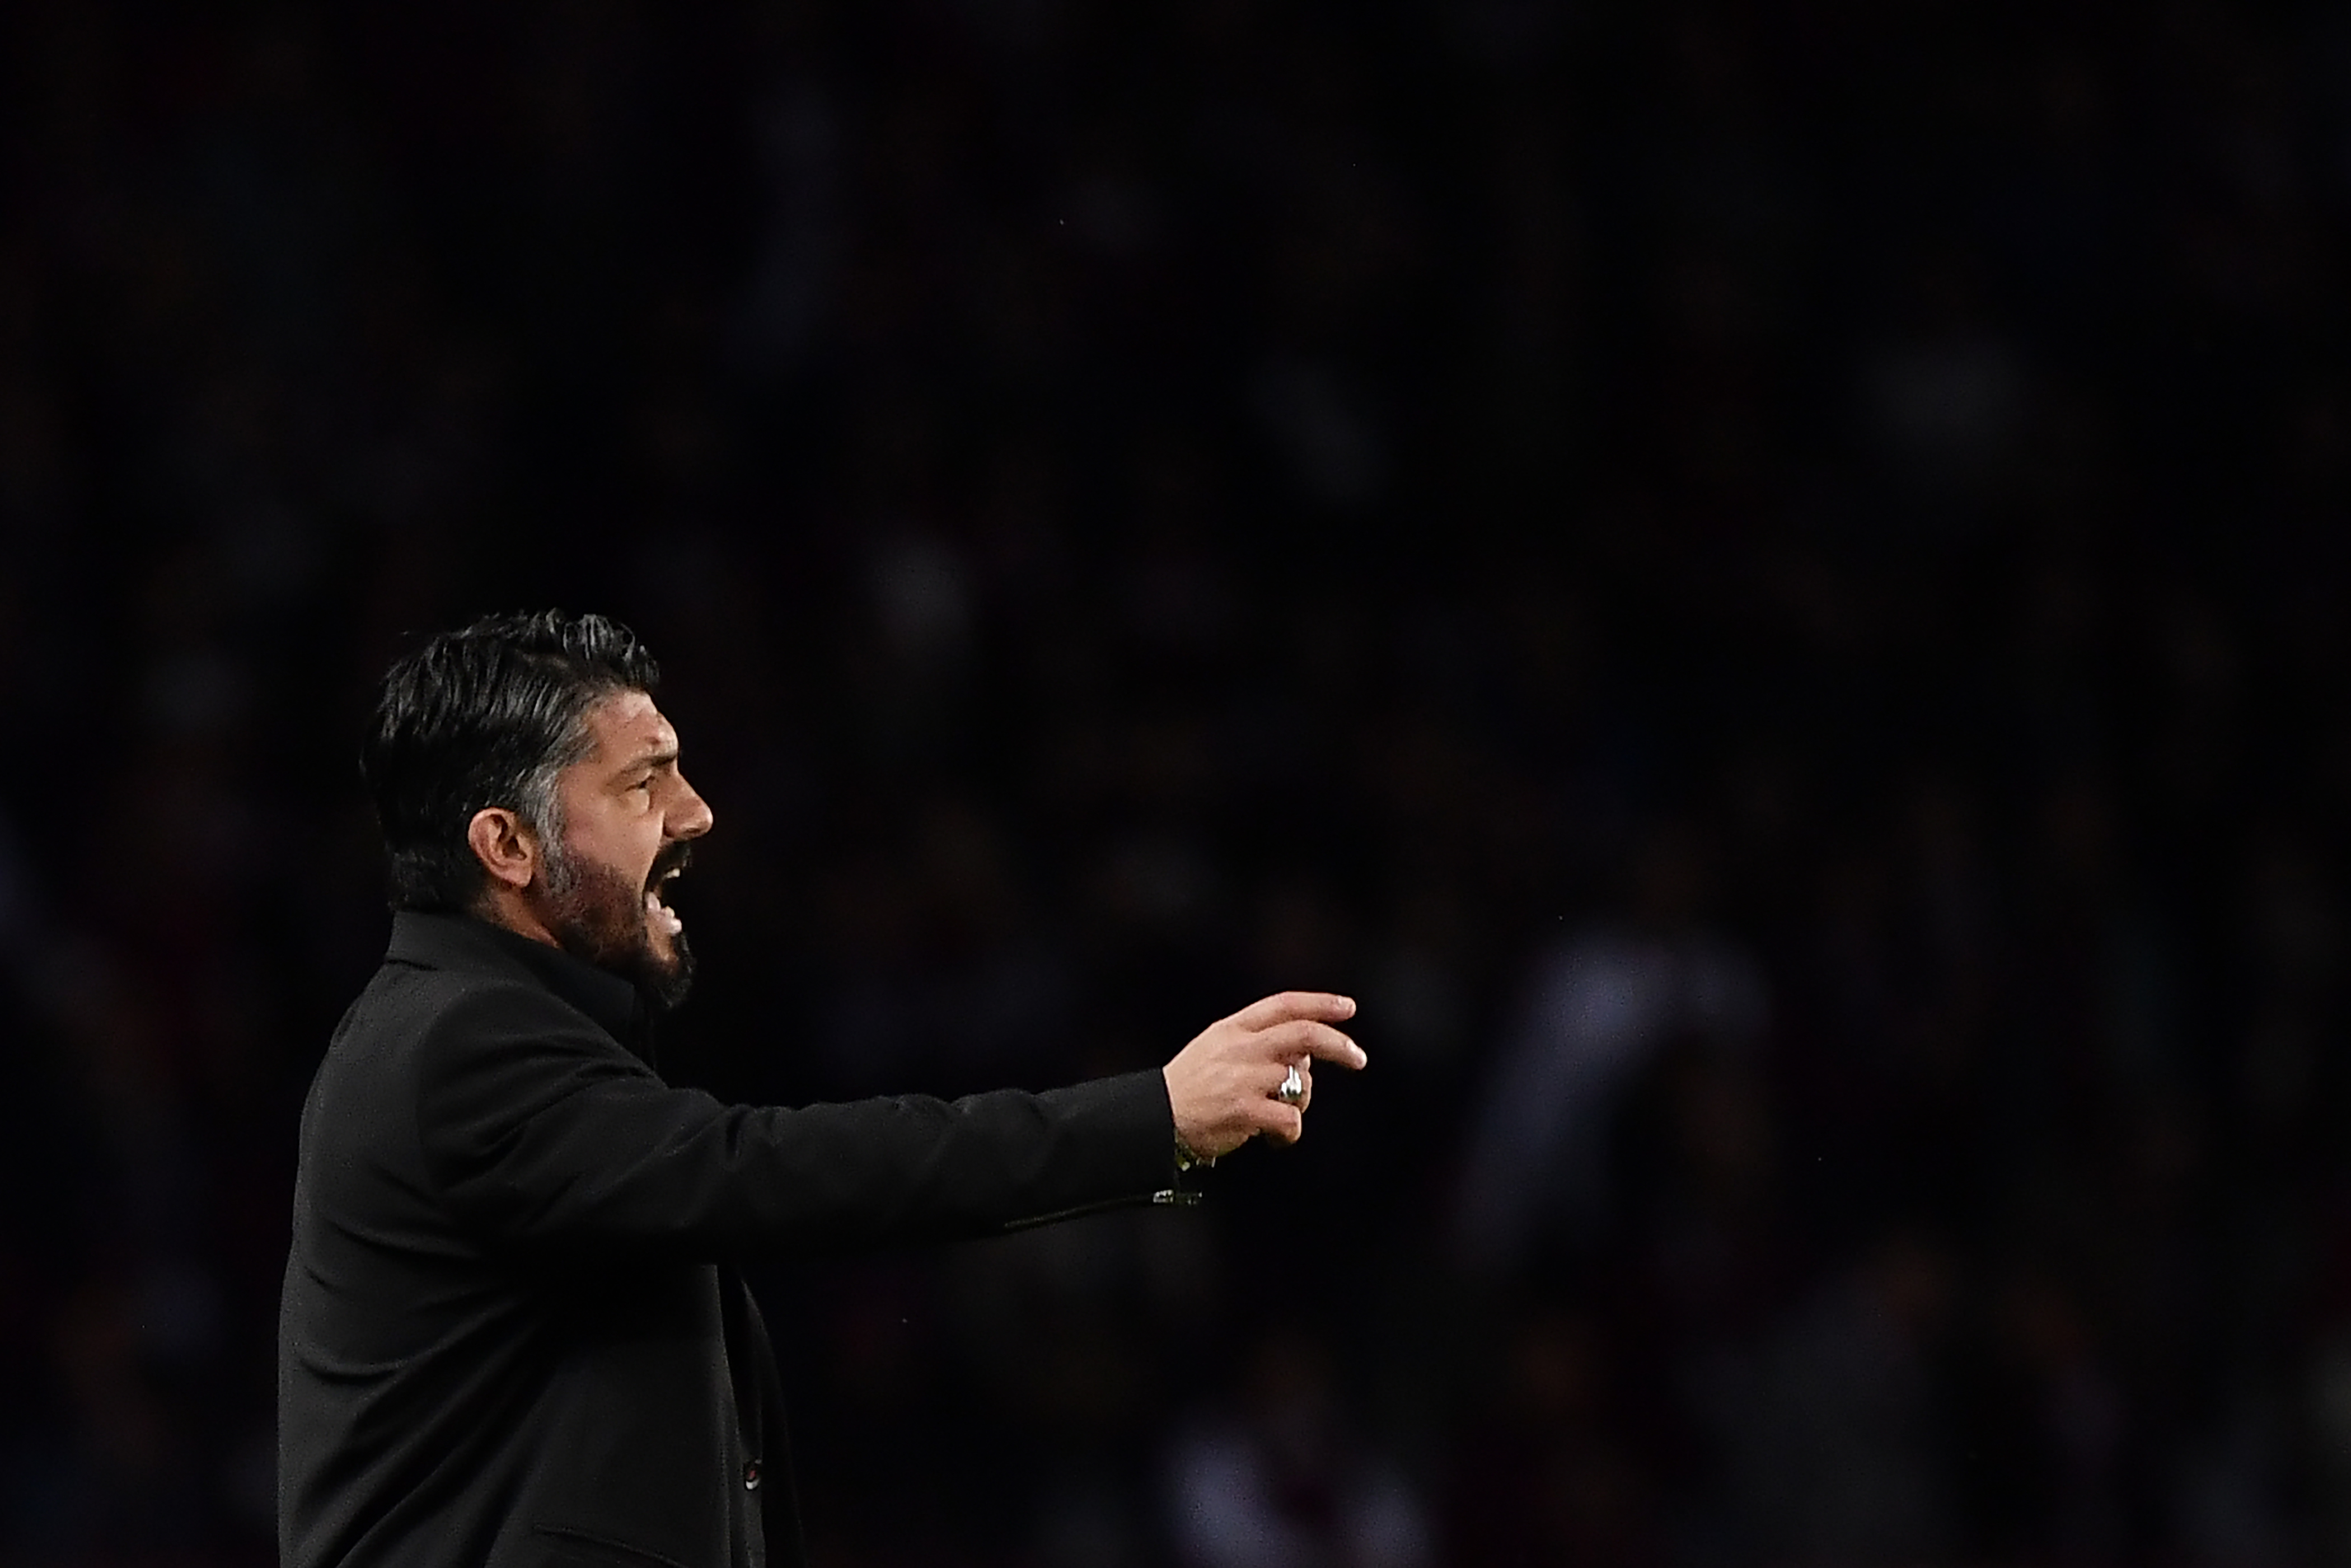 Milan's Italian coach Gennaro Gattuso gestures during the Italian Serie A football match between Torino and AC Milan on April 28, 2019 at the Grande Torino stadium in Turin. (Photo by MARCO BERTORELLO / AFP)        (Photo credit should read MARCO BERTORELLO/AFP/Getty Images)